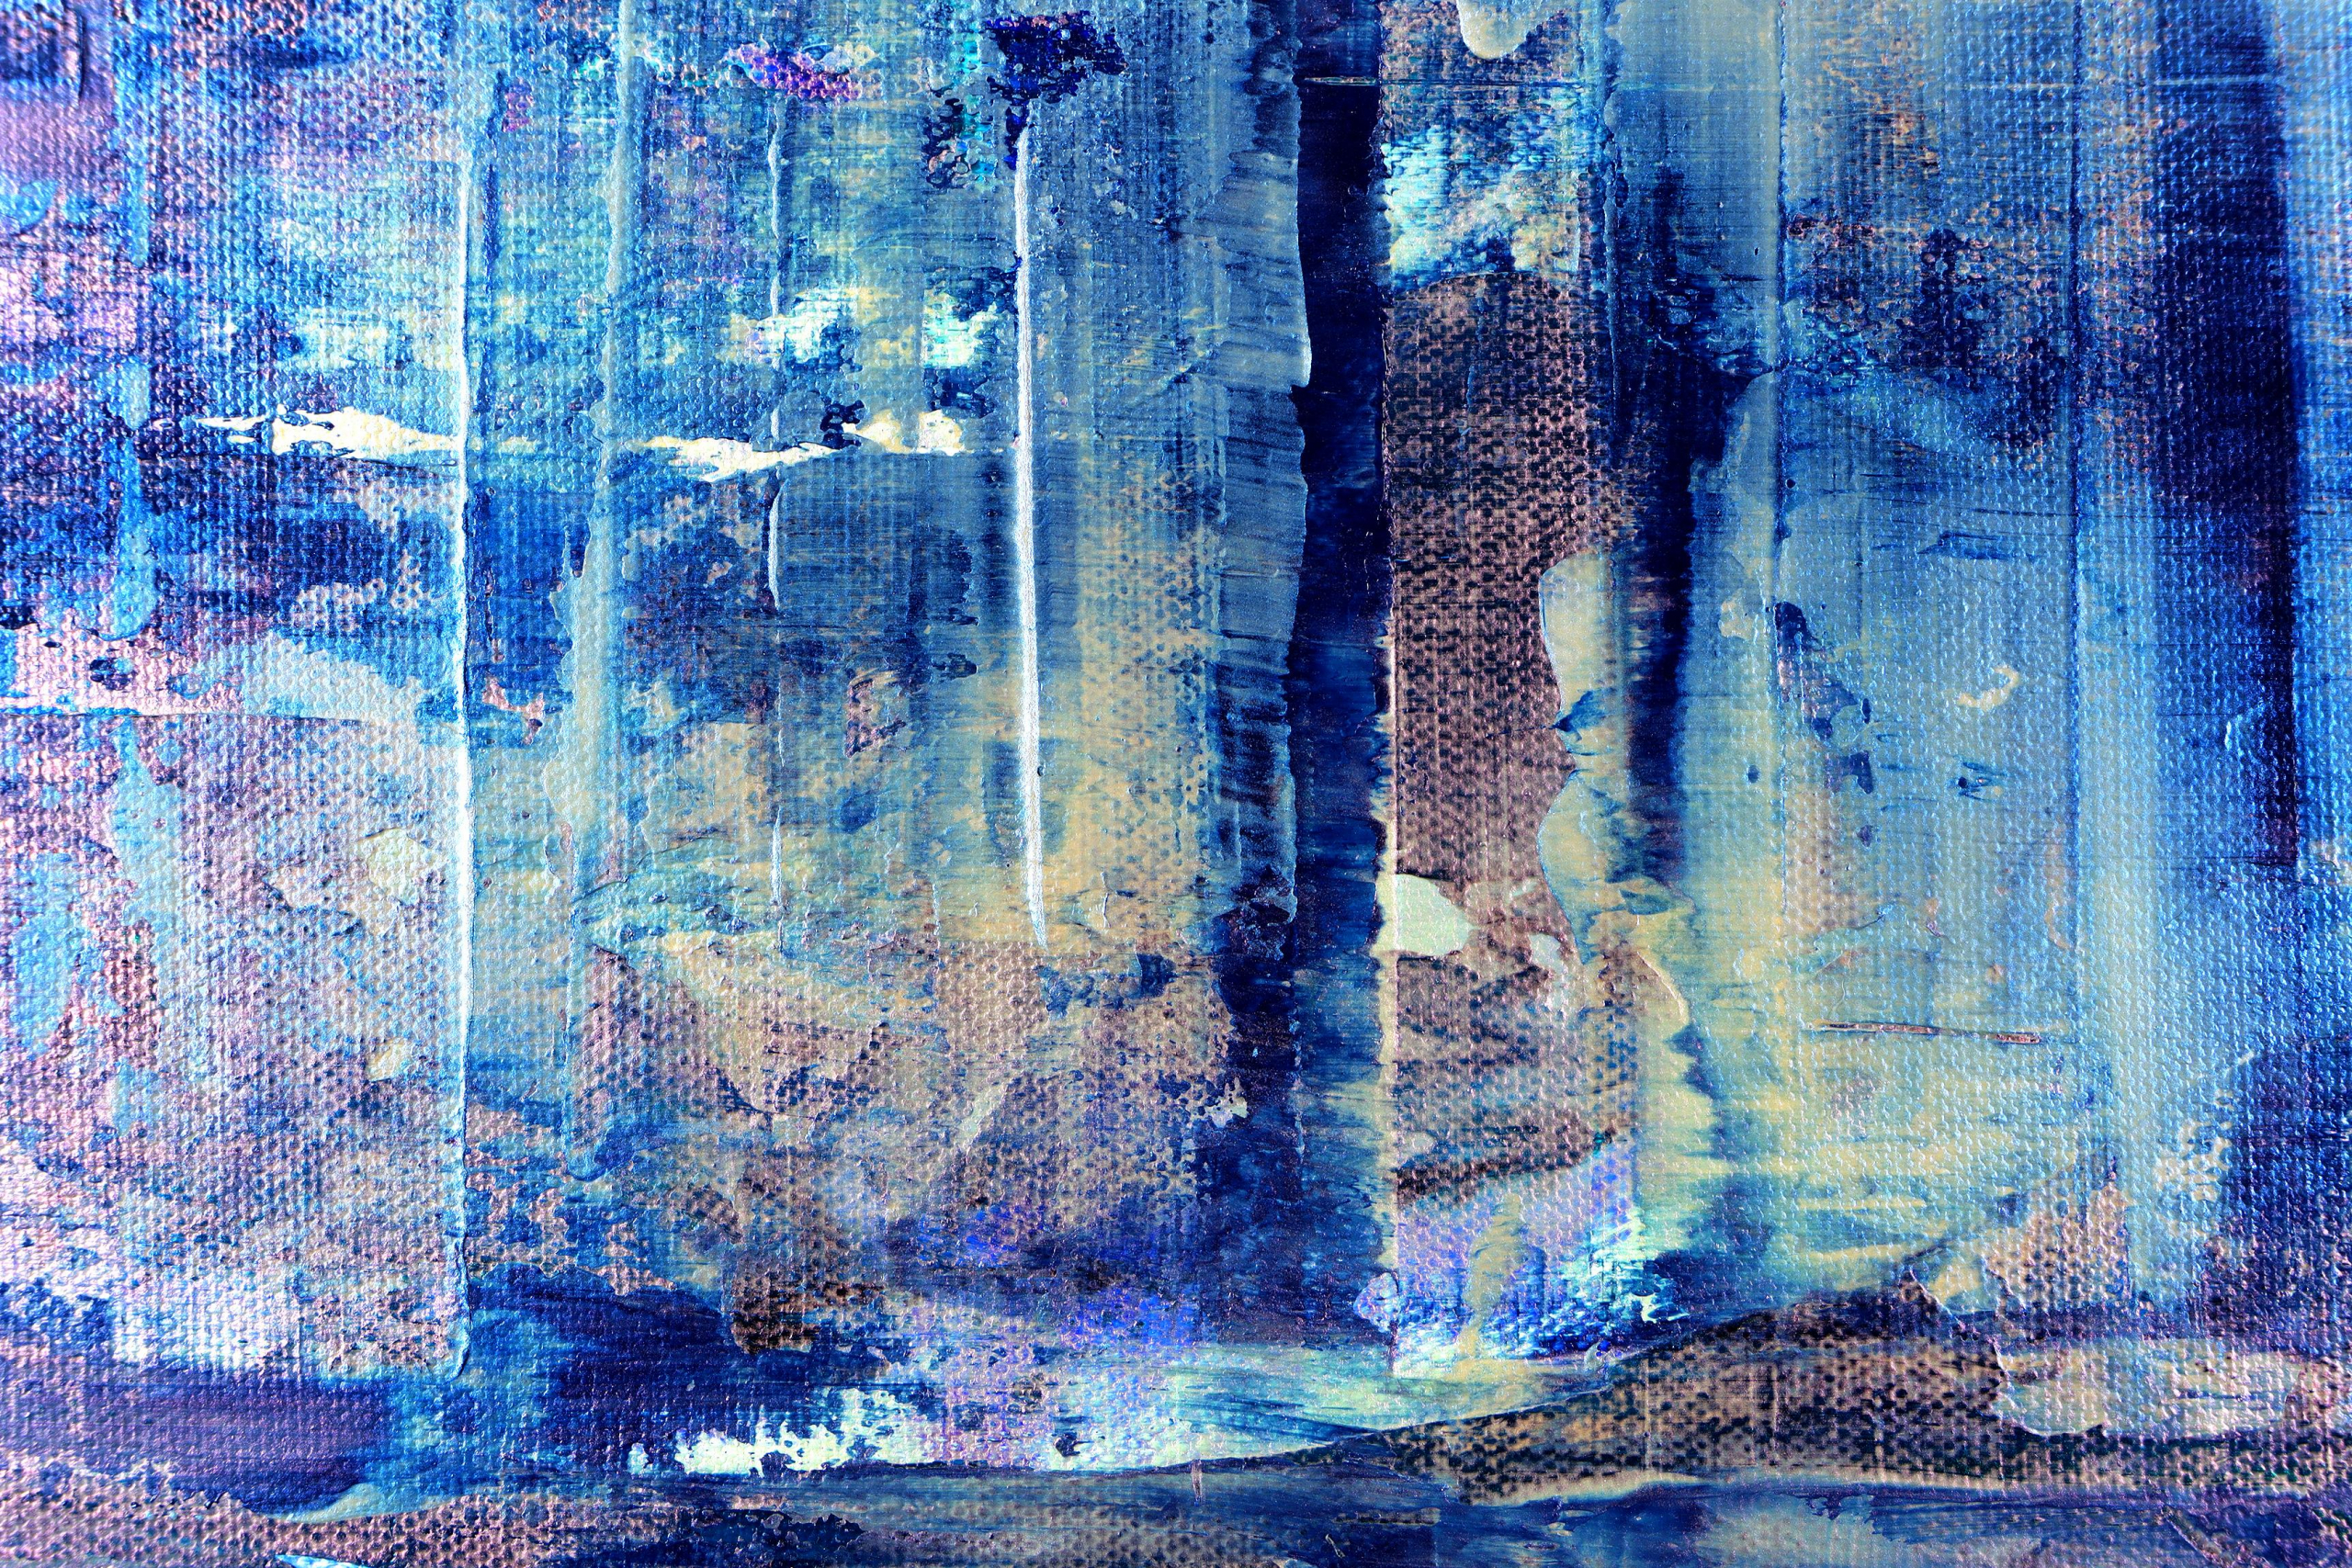 Interference Reflections (Ice) (2022) / DETAIL / 30x30 inches / Nestor Toro